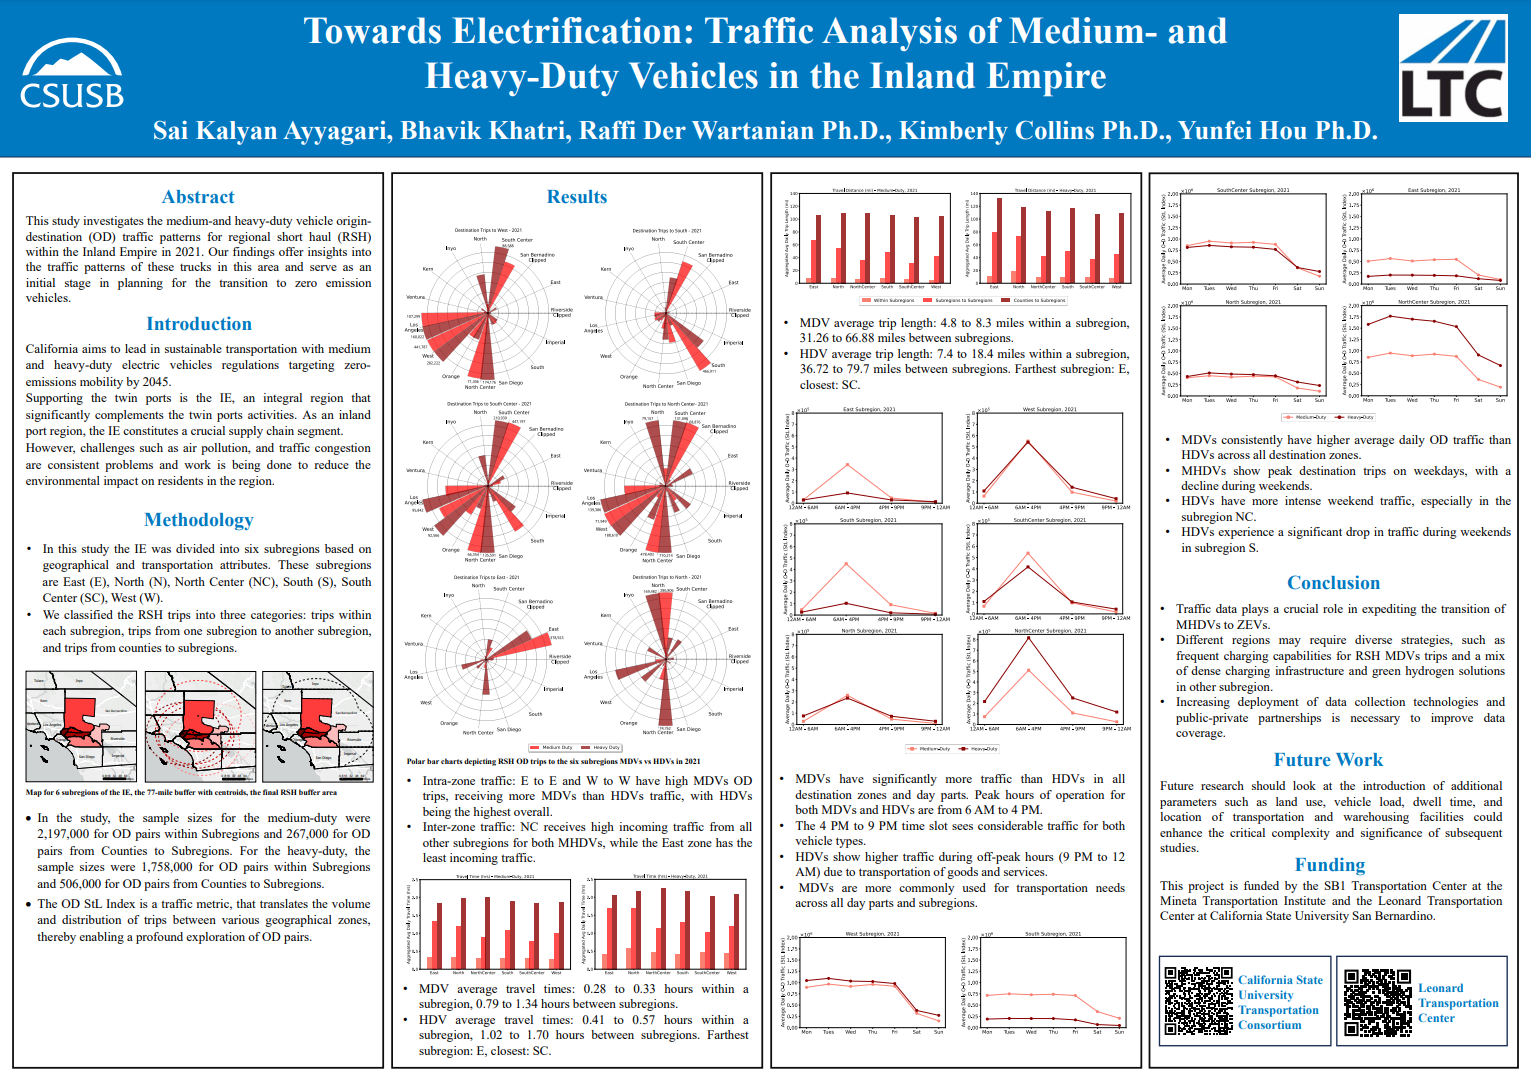 Towards Electrification: Traffic Analysis of MD-HD Vehicles in the IE